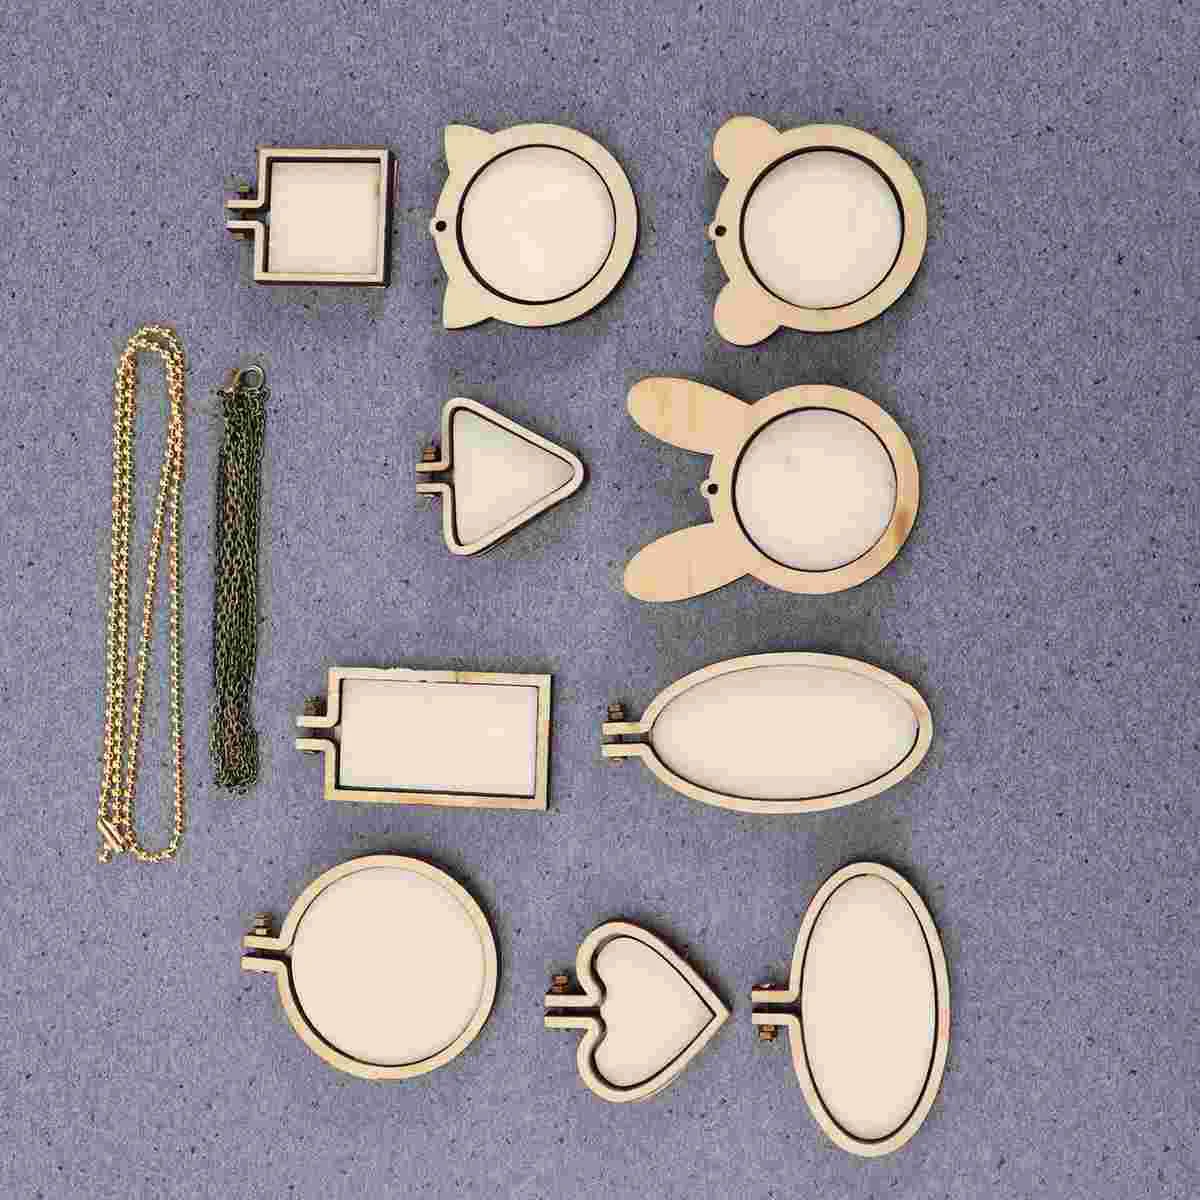 

12 Pcs Wooden Embroidery Hoop Mini Crossing Oval Ring Needlepoint Frames Craft Hoops